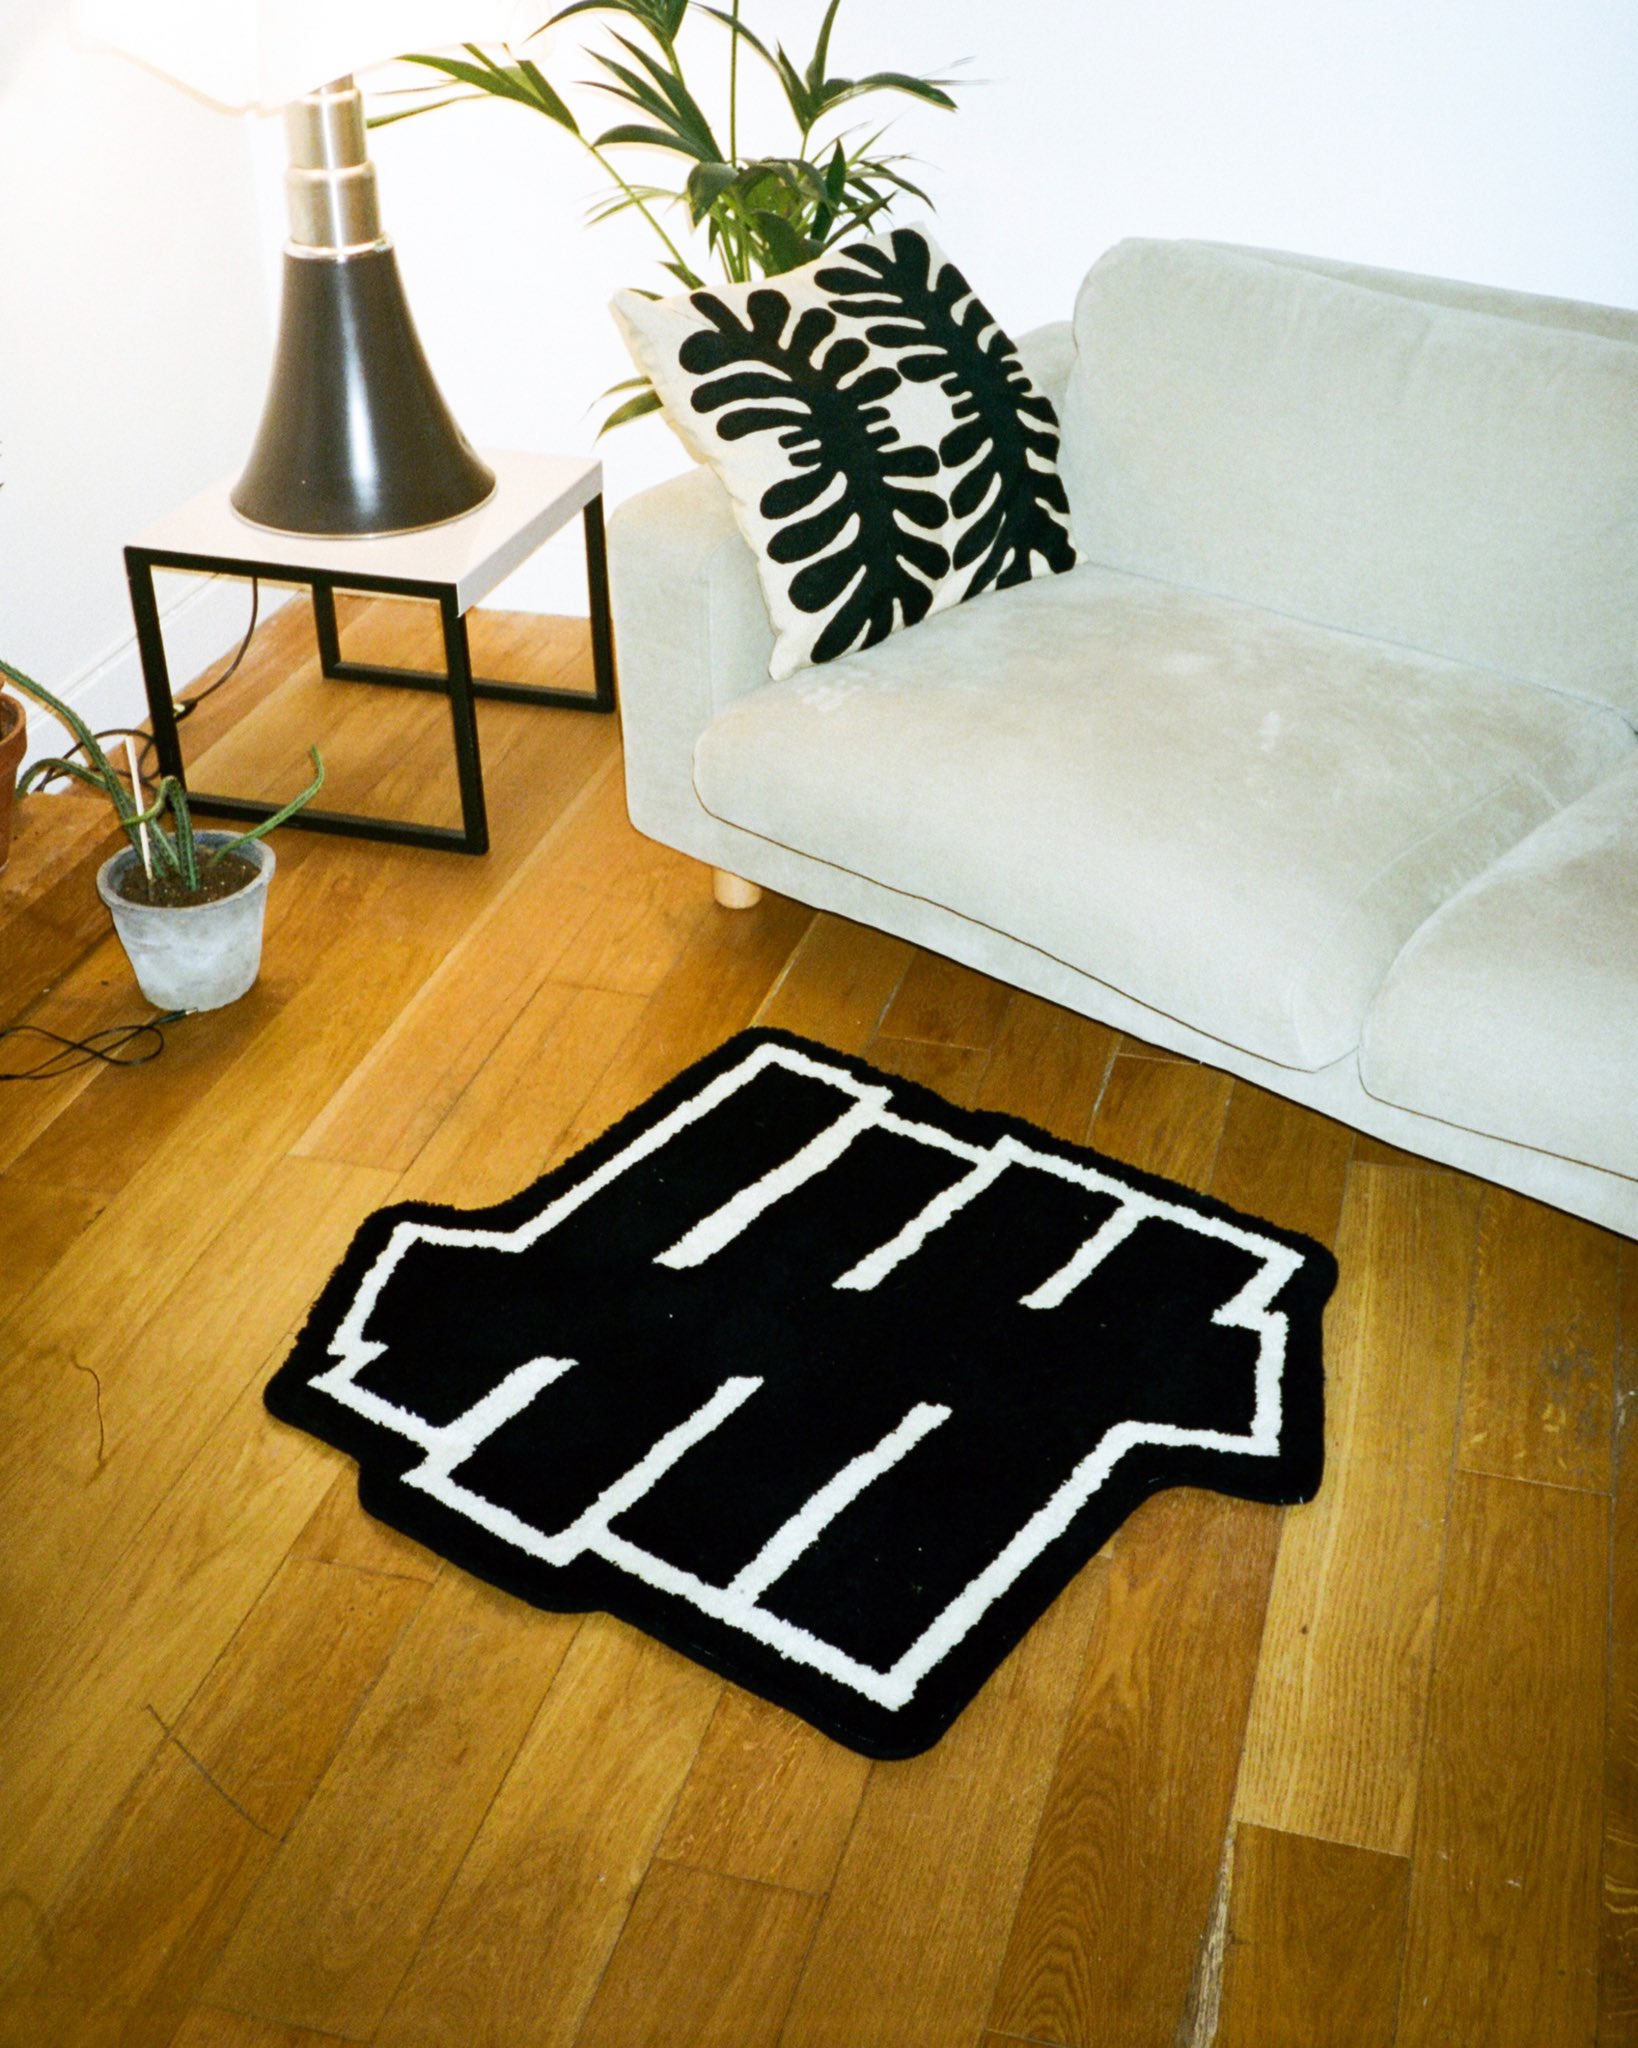 UNDEFEATED X G1950 DUCK CAMO ICON RUG